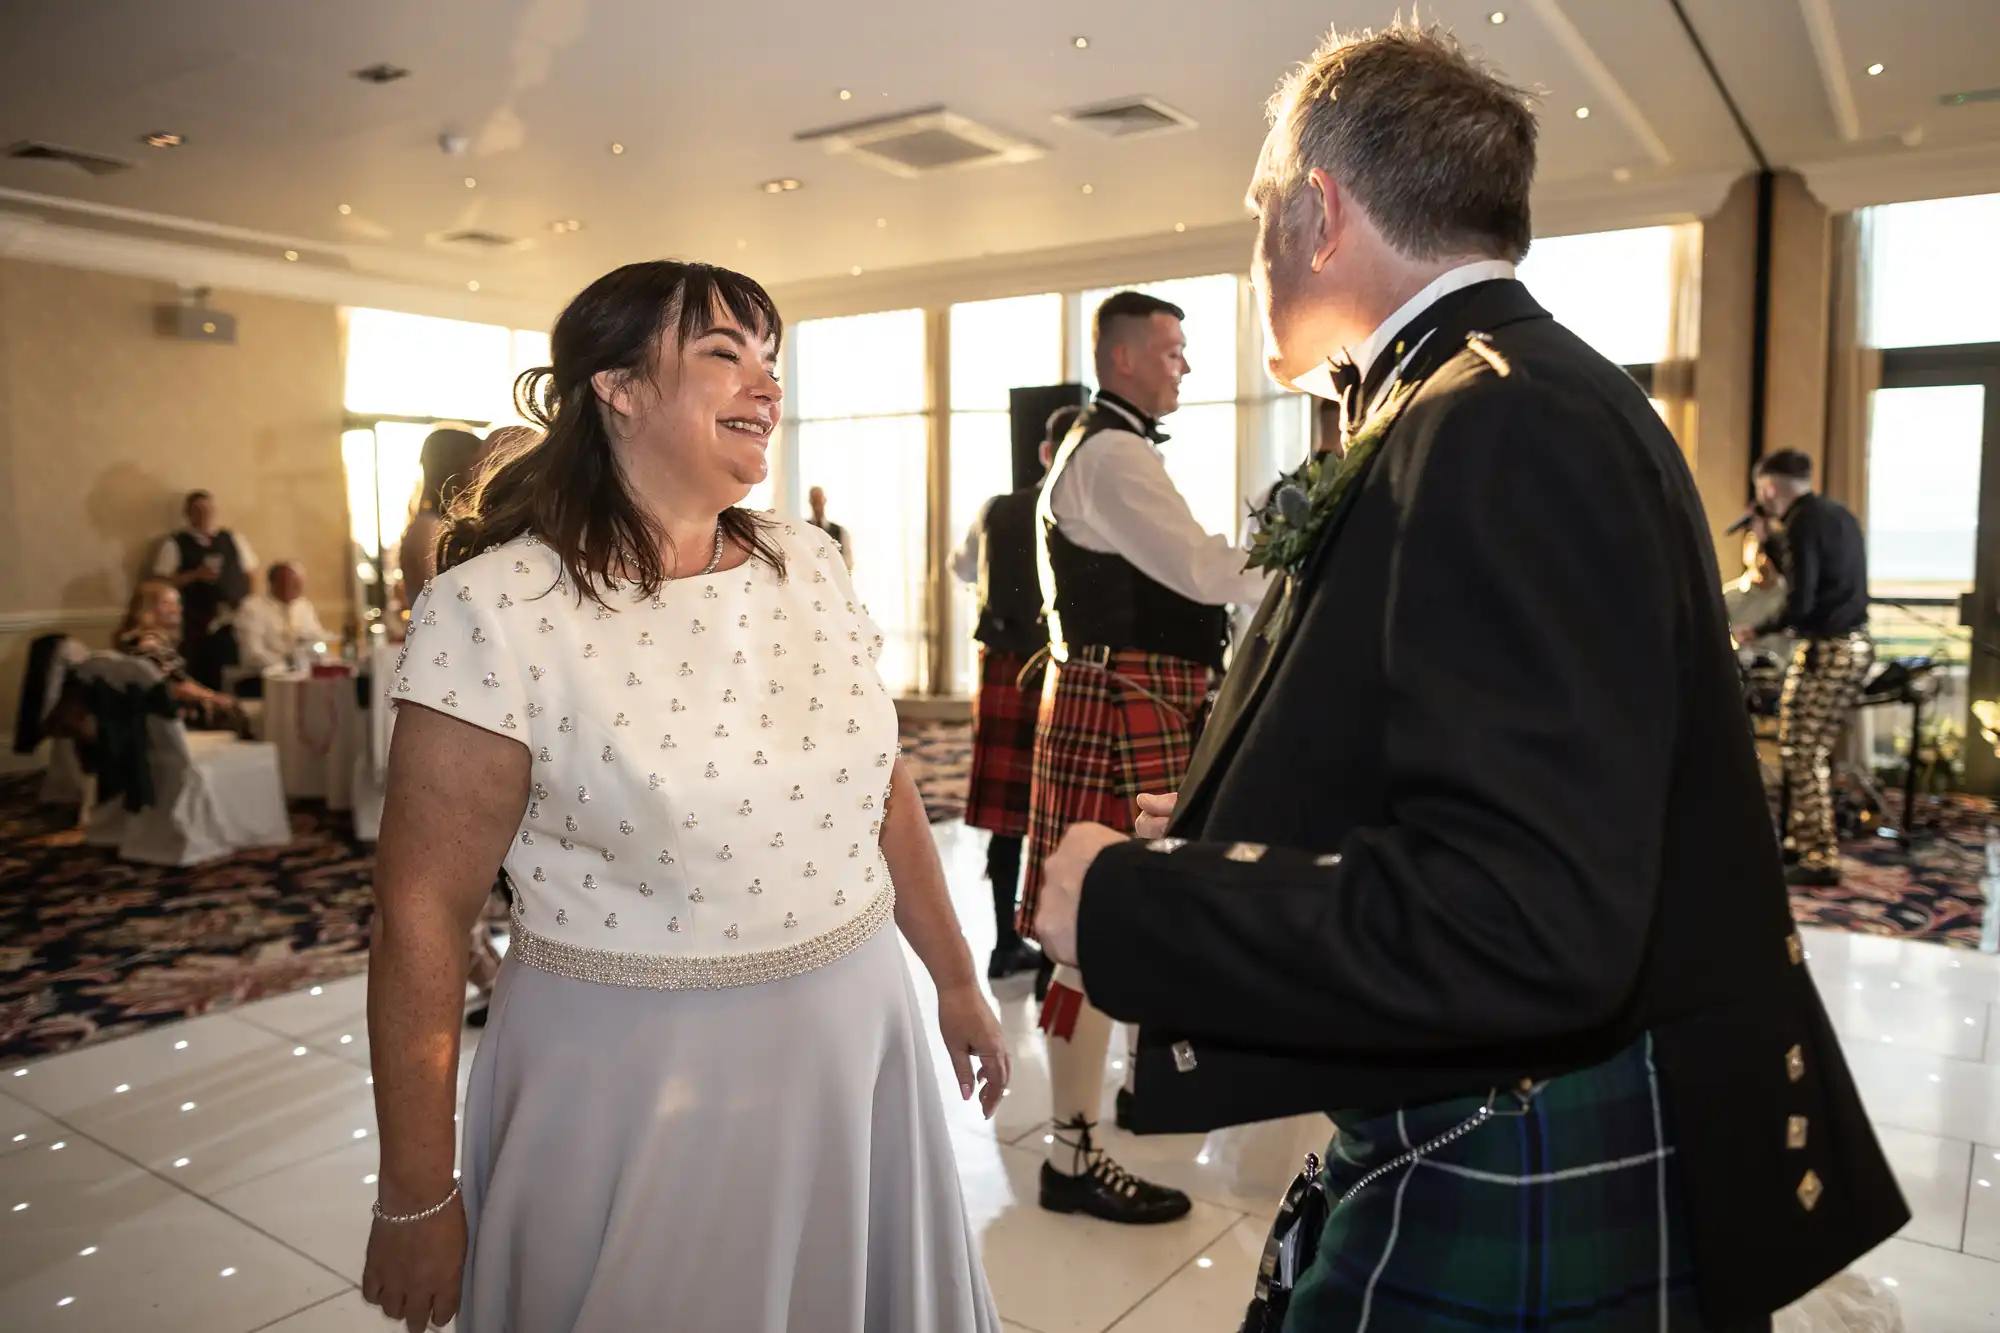 A woman in a white dress smiles widely at a man in a traditional Scottish kilt during an indoor event with bagpipers in the background.